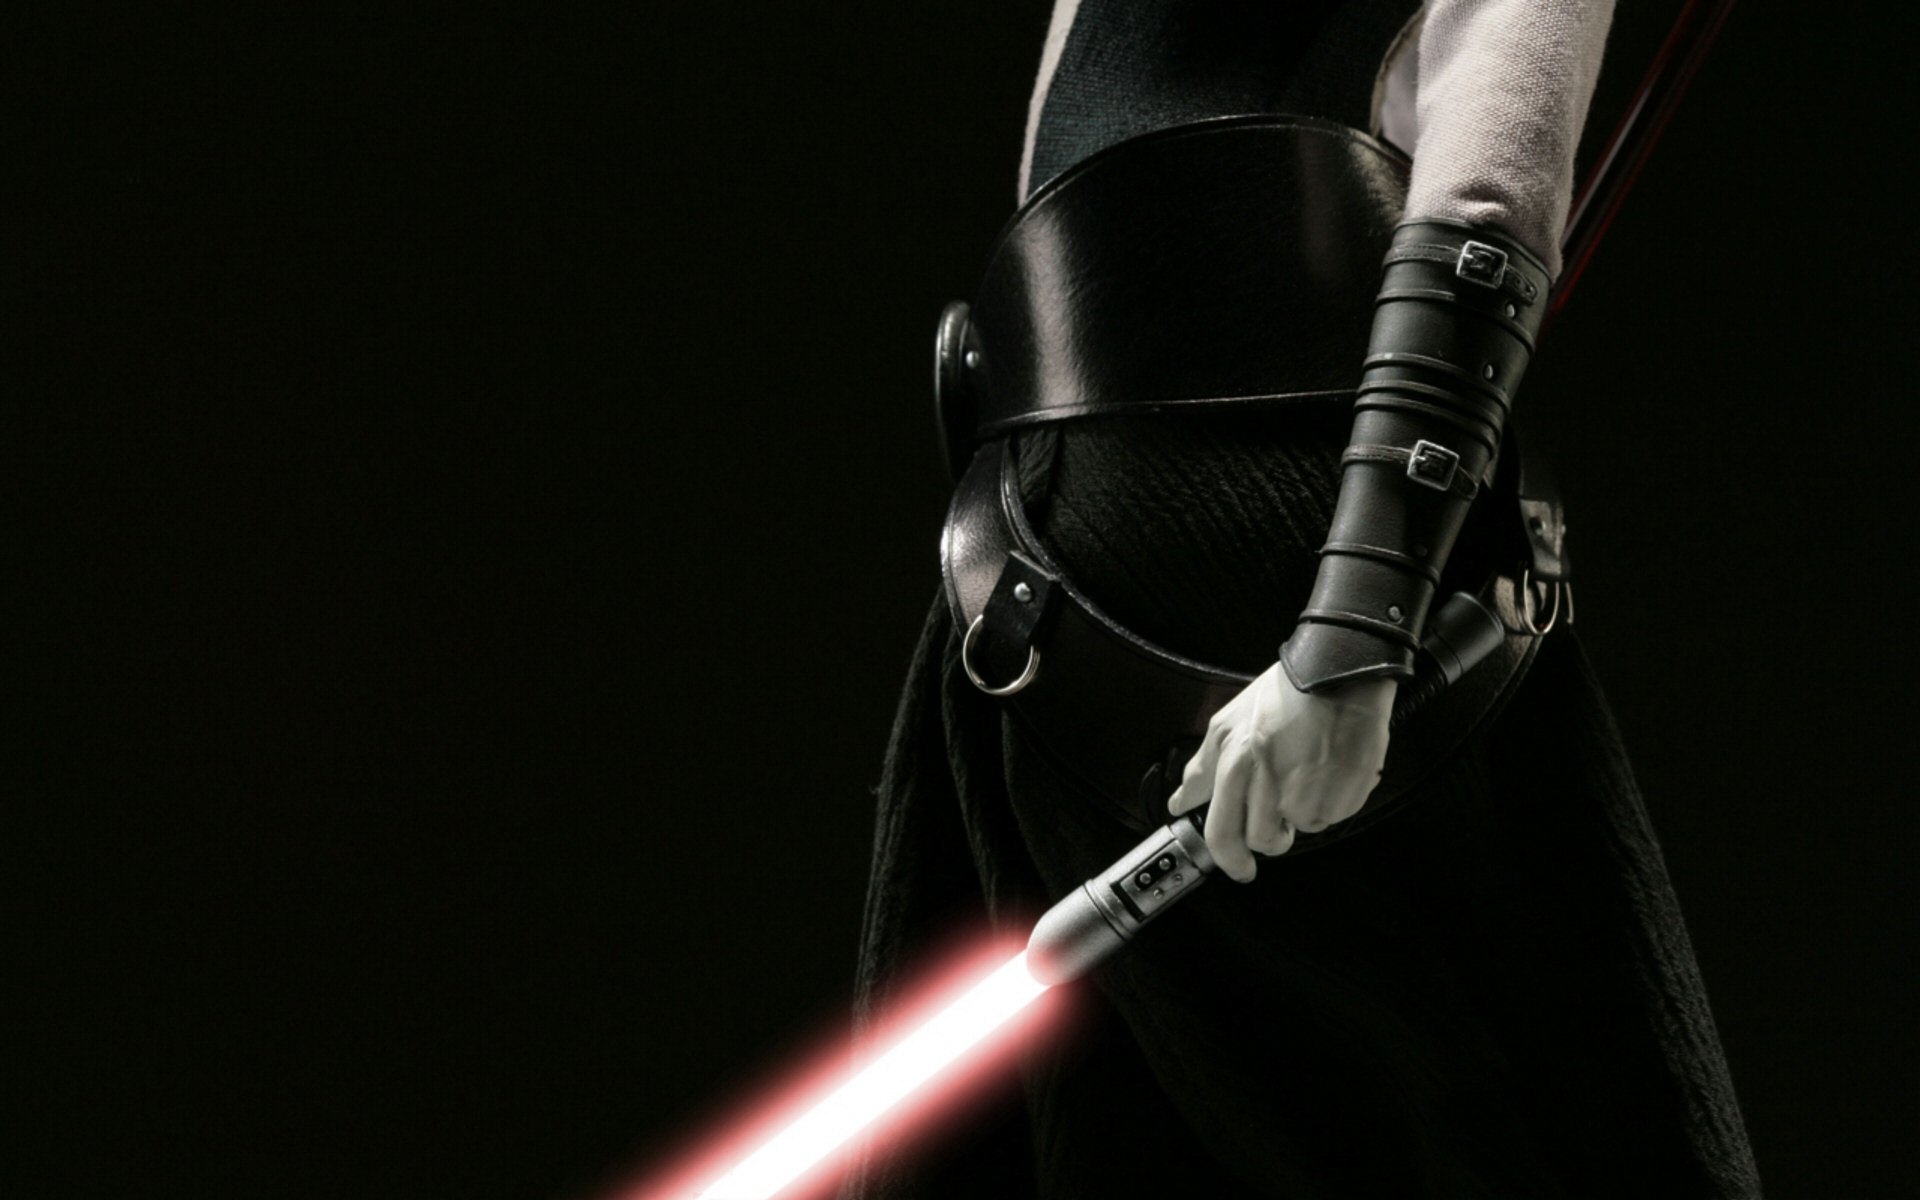 Sith and Saber HD Wallpapers Sith and Saber Desktop Wallpapers Sith